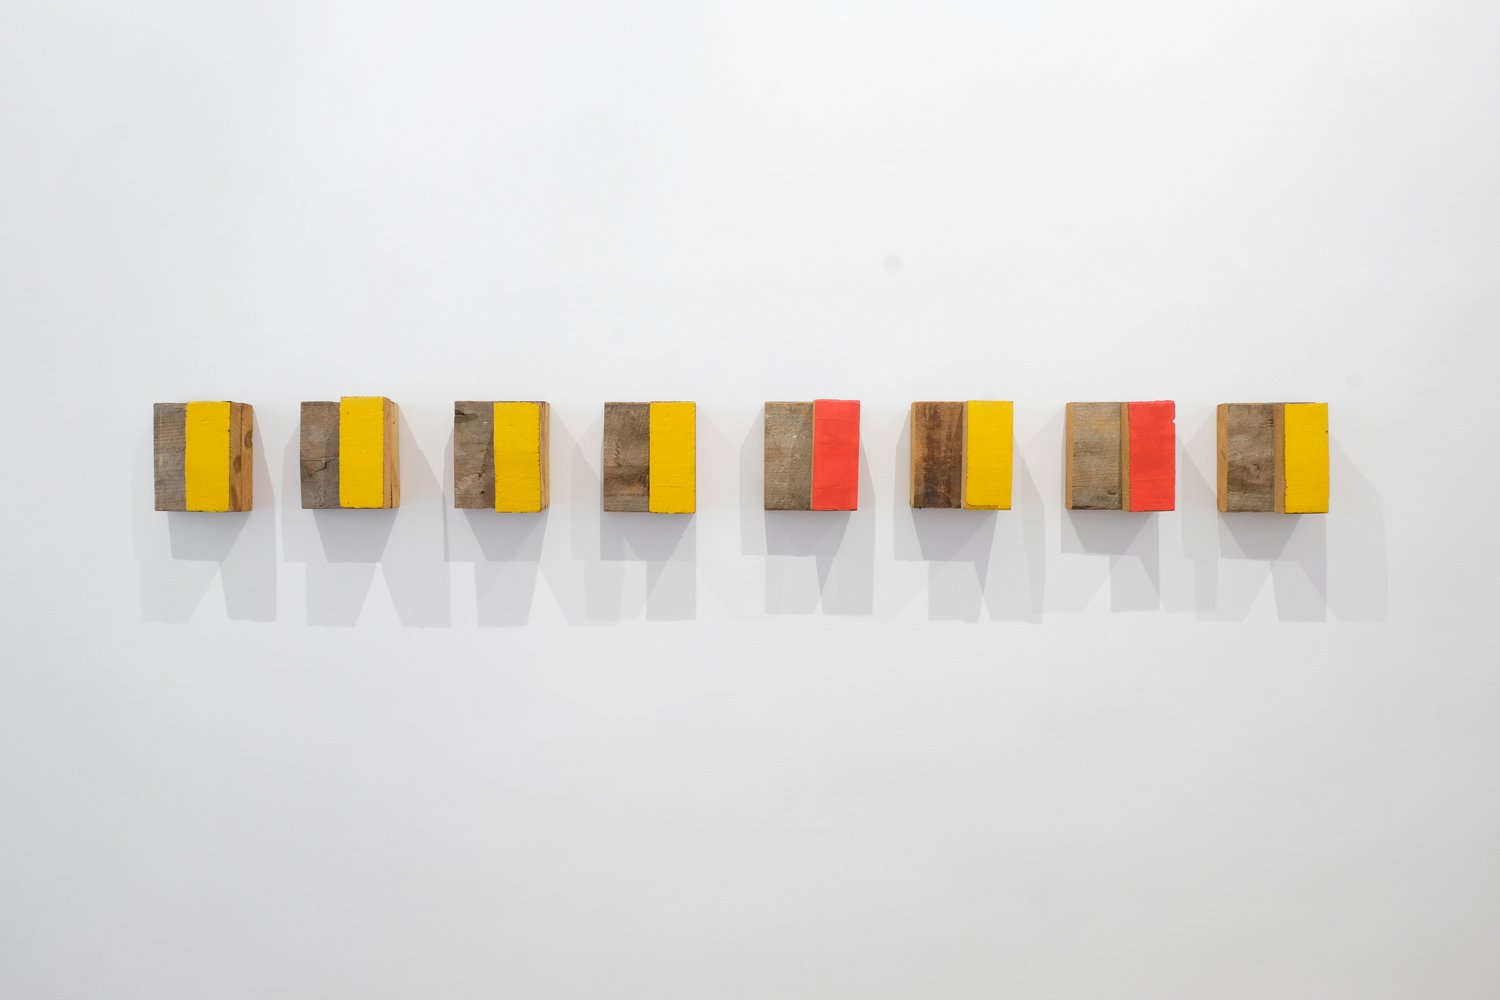   Richard Nonas,     Eight Piece Wall Sculpture , 1990,  Signed and dated on verso  Painted wood  25 x 22 x 15 cm each piece  (RN0017) 